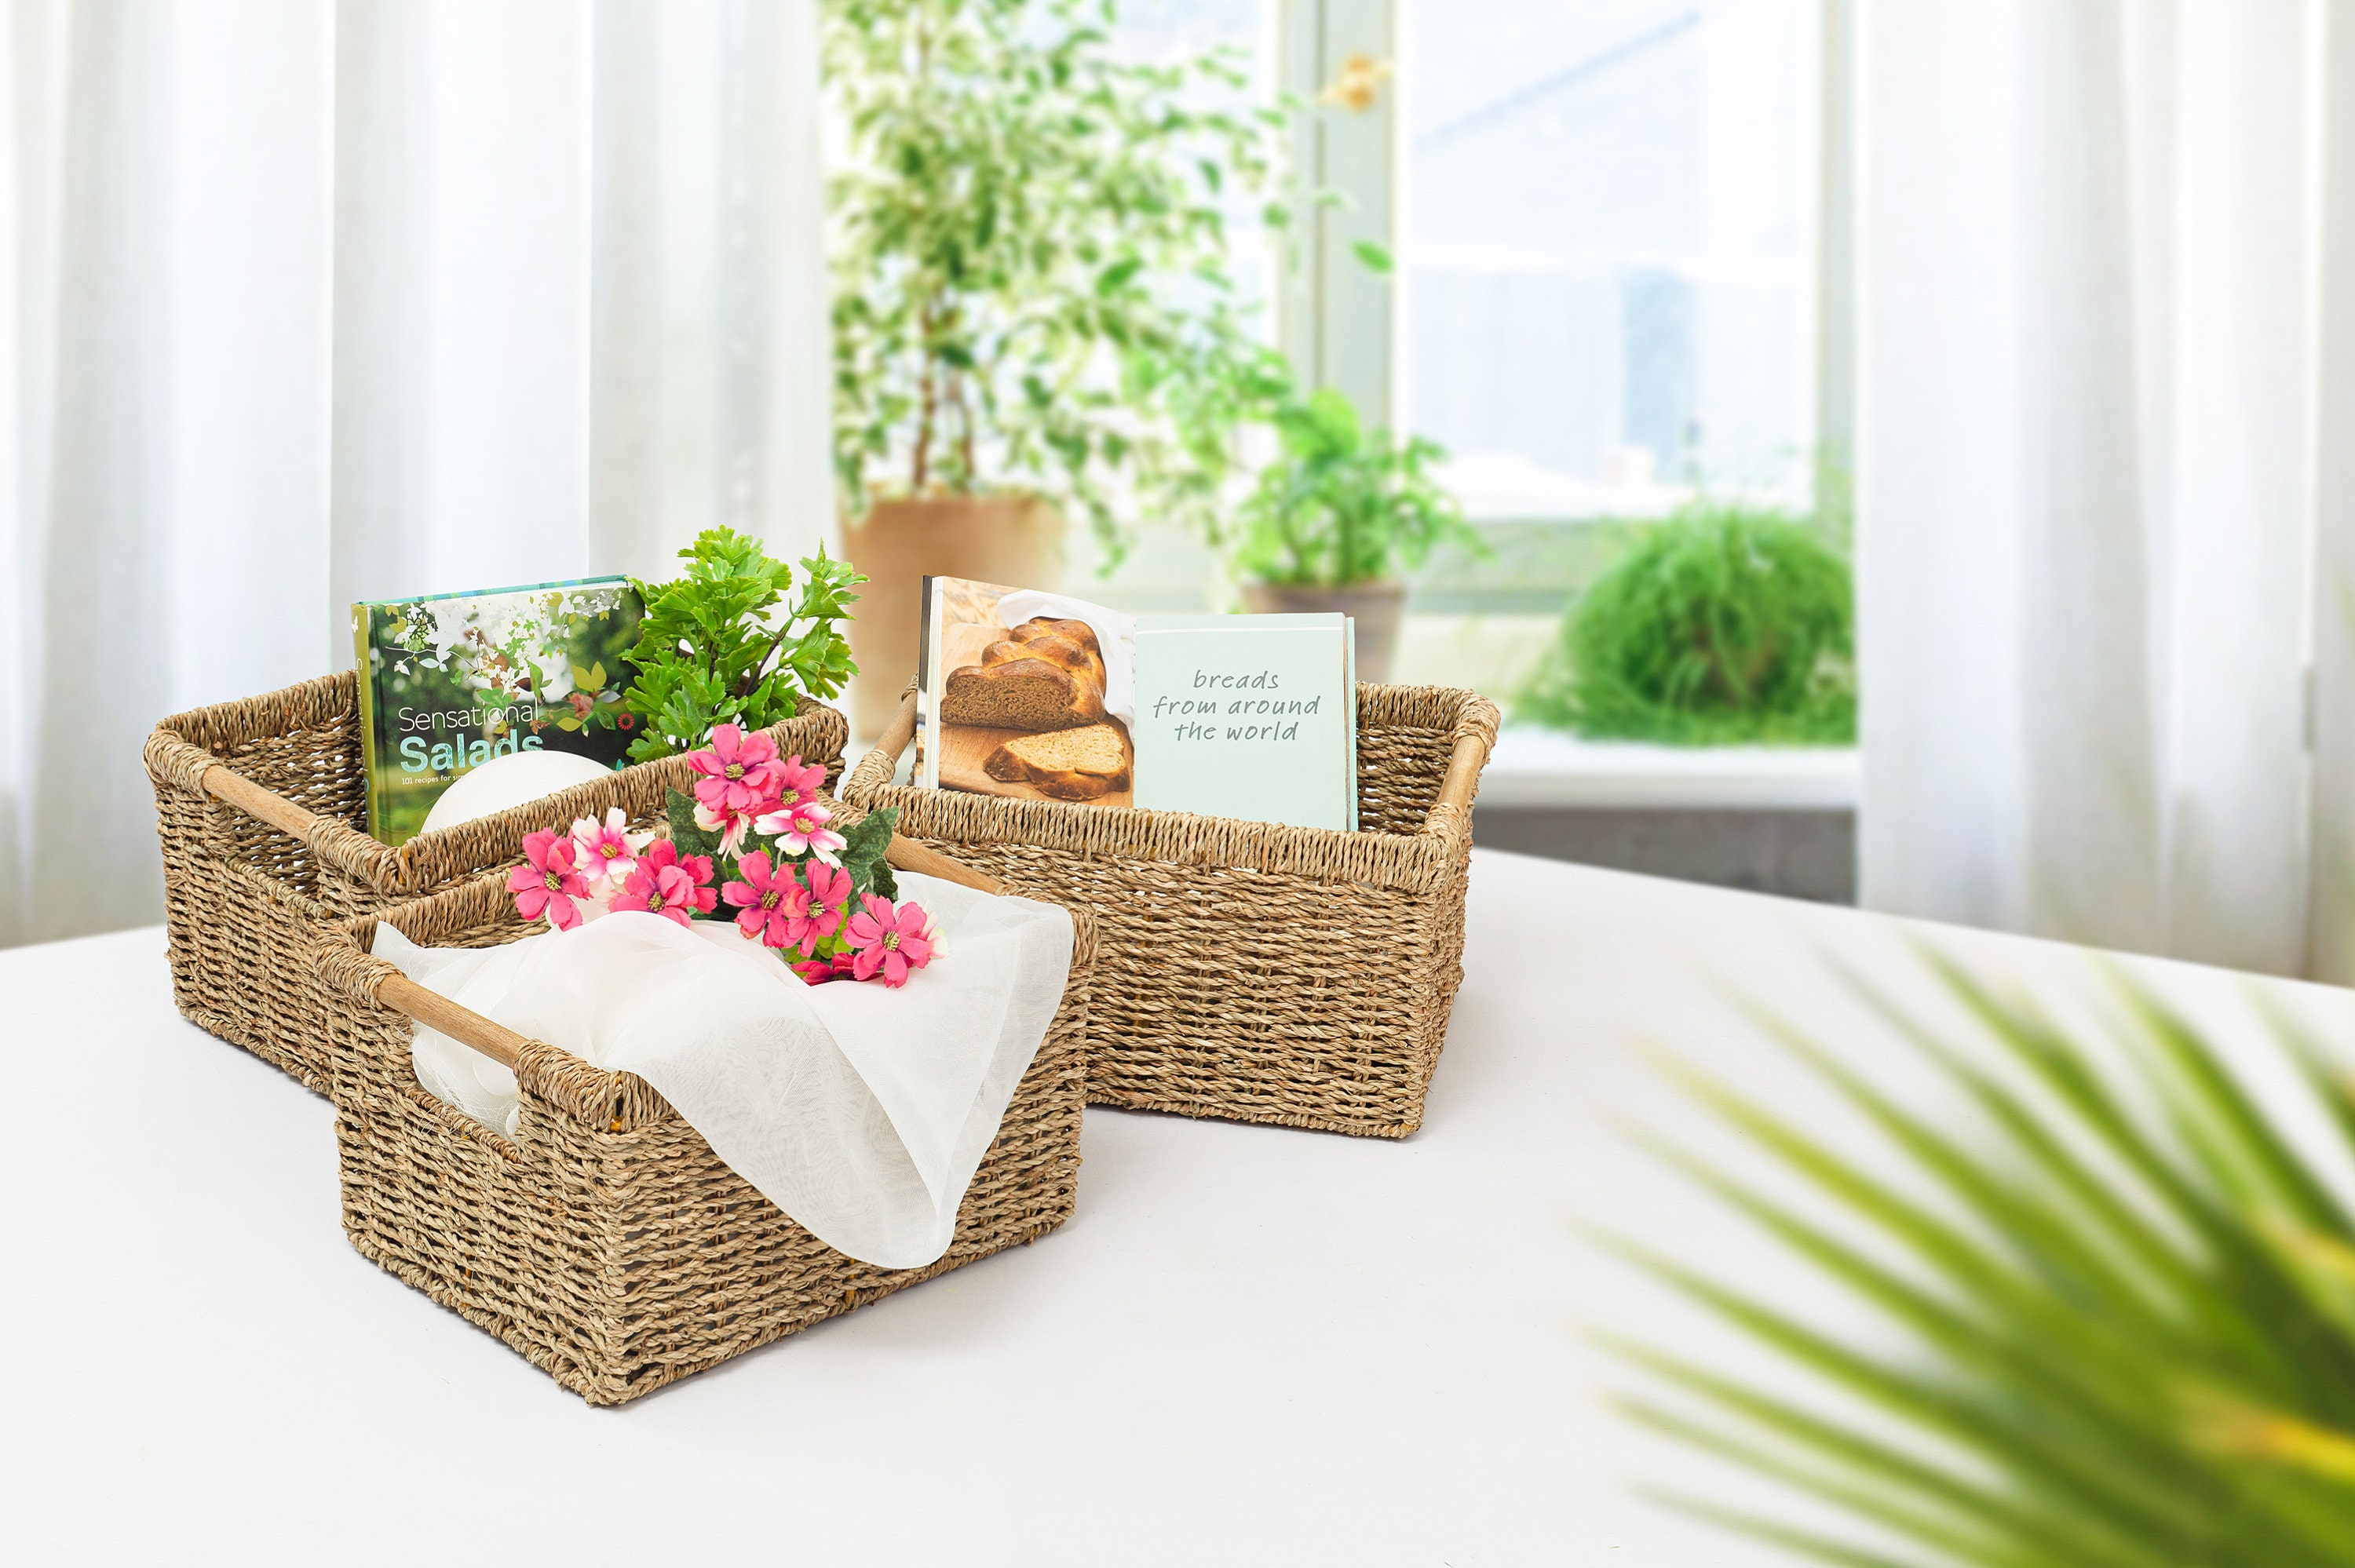 Small Wicker Baskets for Storage Organizing, Water Hyacinth Baskets  Rectangular, Natural Wicker Storage 3 Pack same Size 